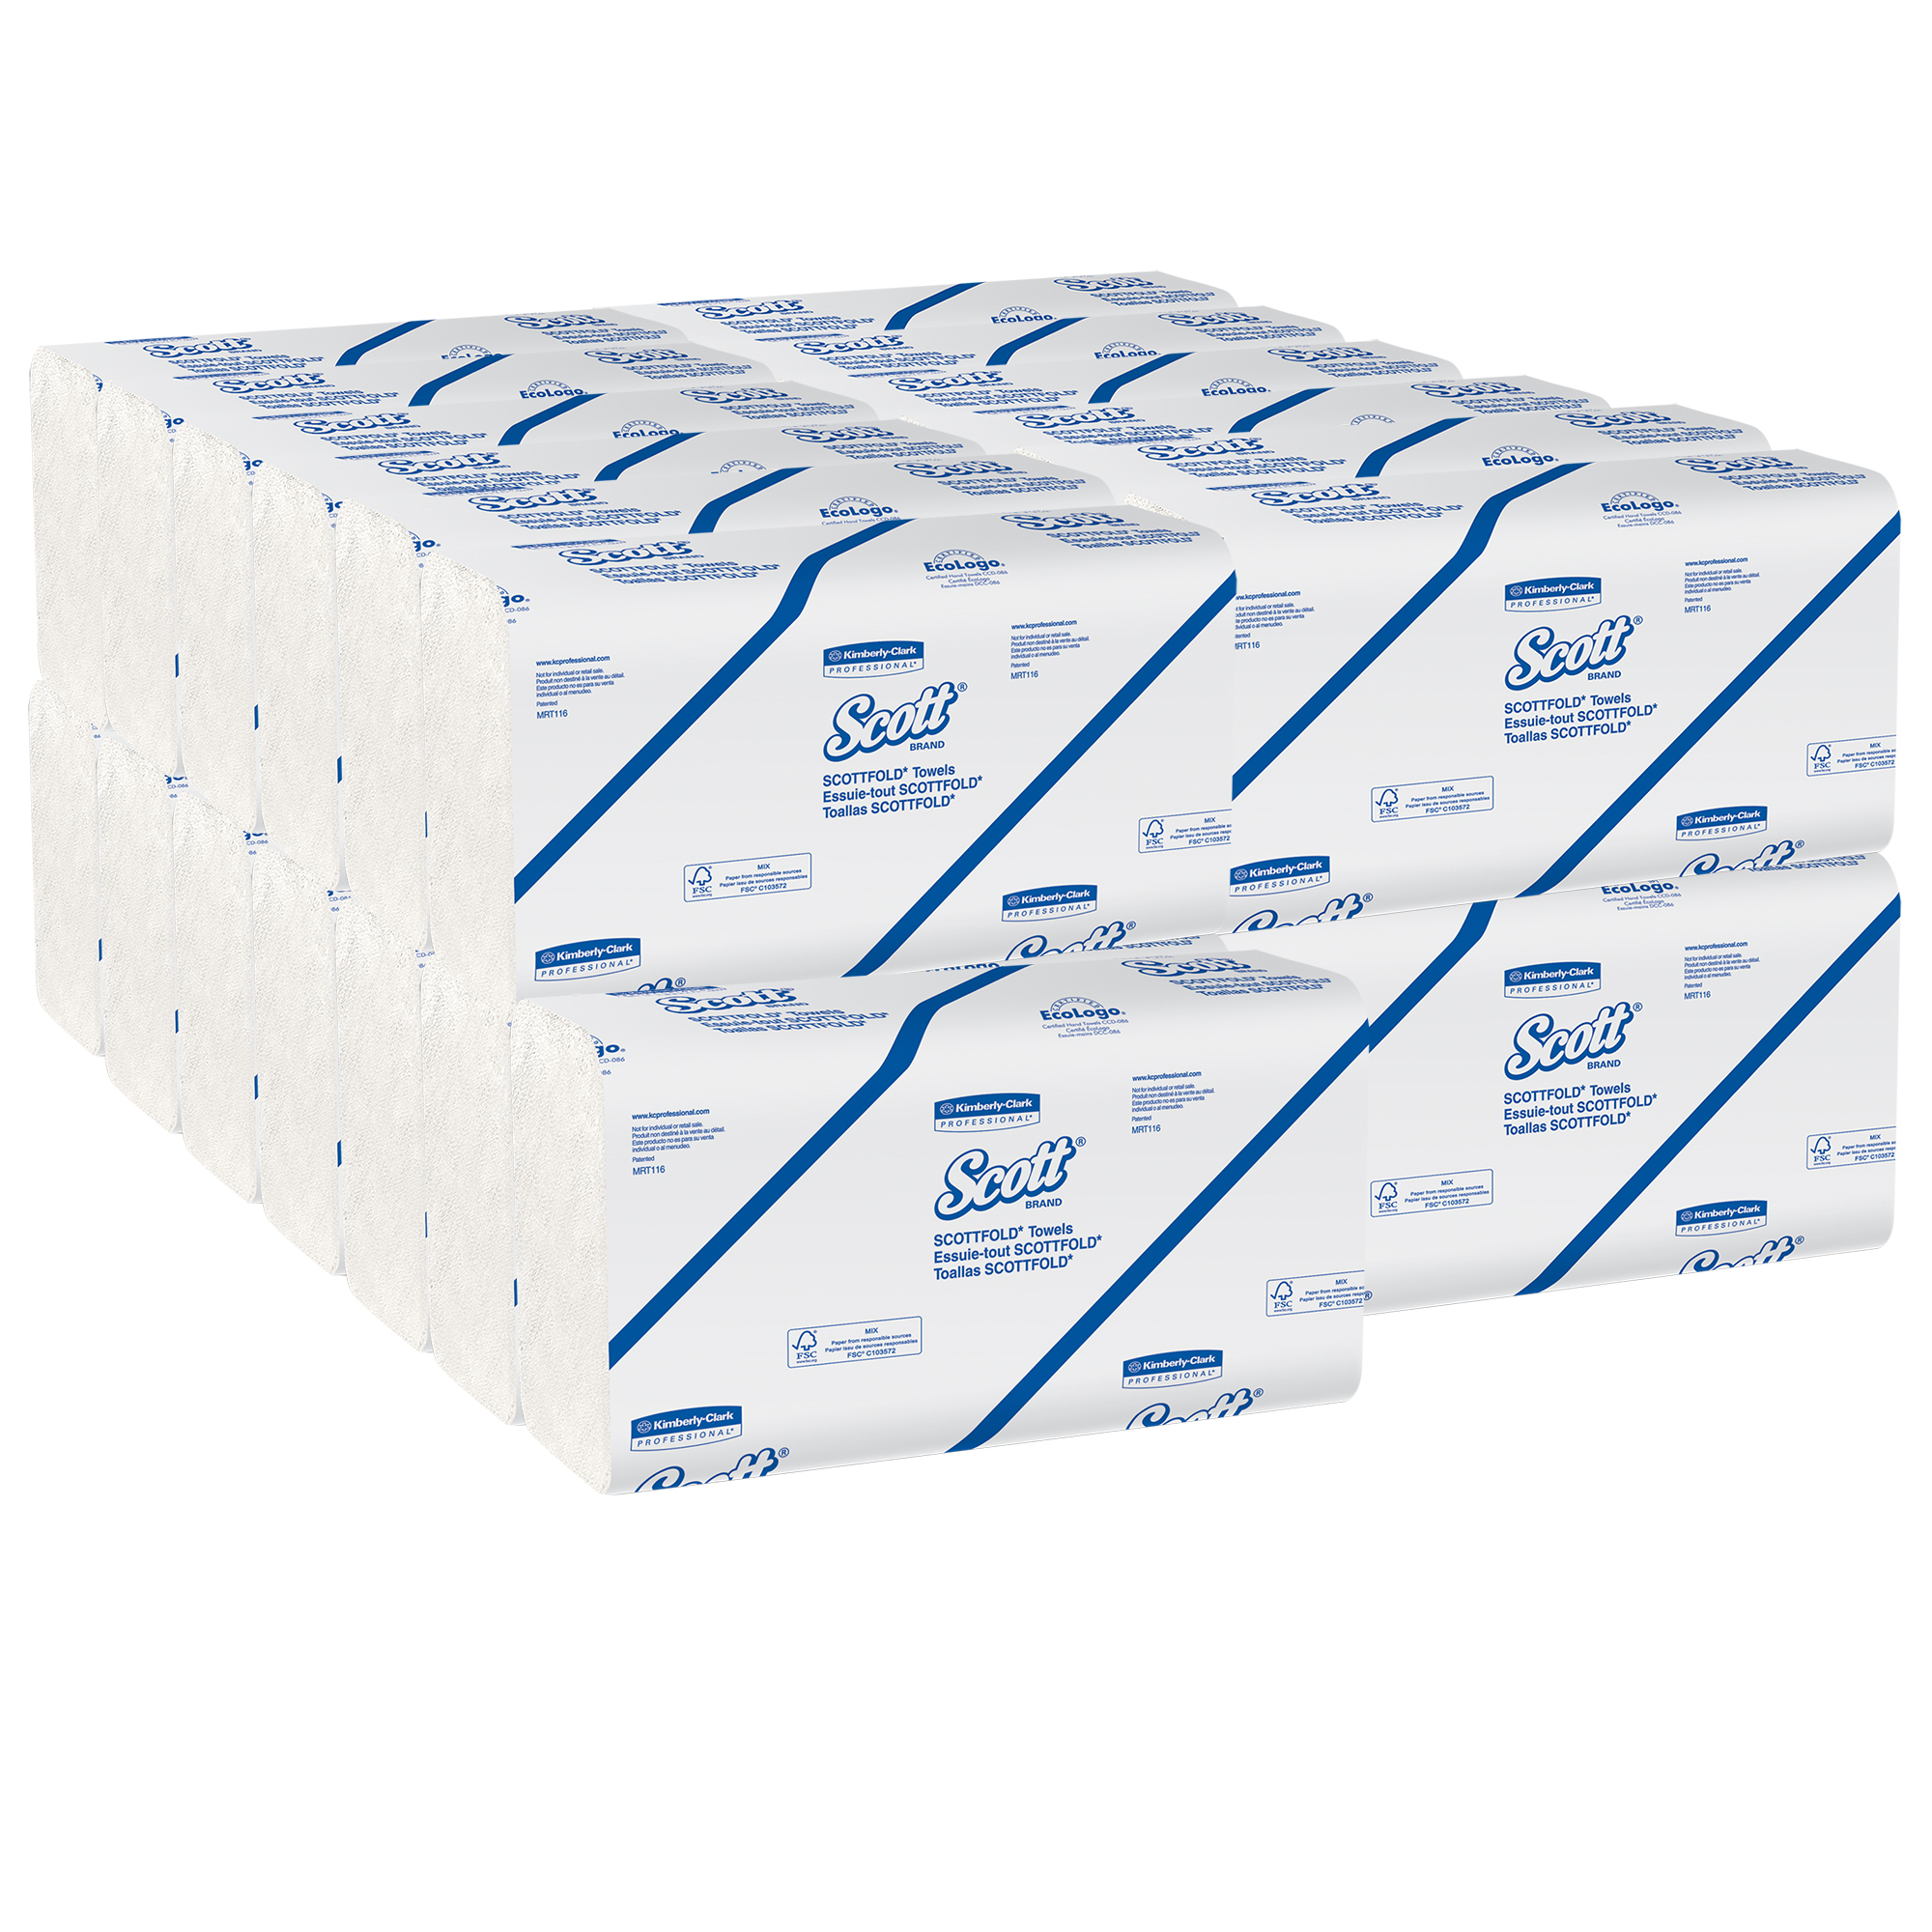 Picture of SCOTTFOLD Paper Towels, 9 2/5 x 12 2/5, White, 175 Towels/Pack, 25 Packs/Carton